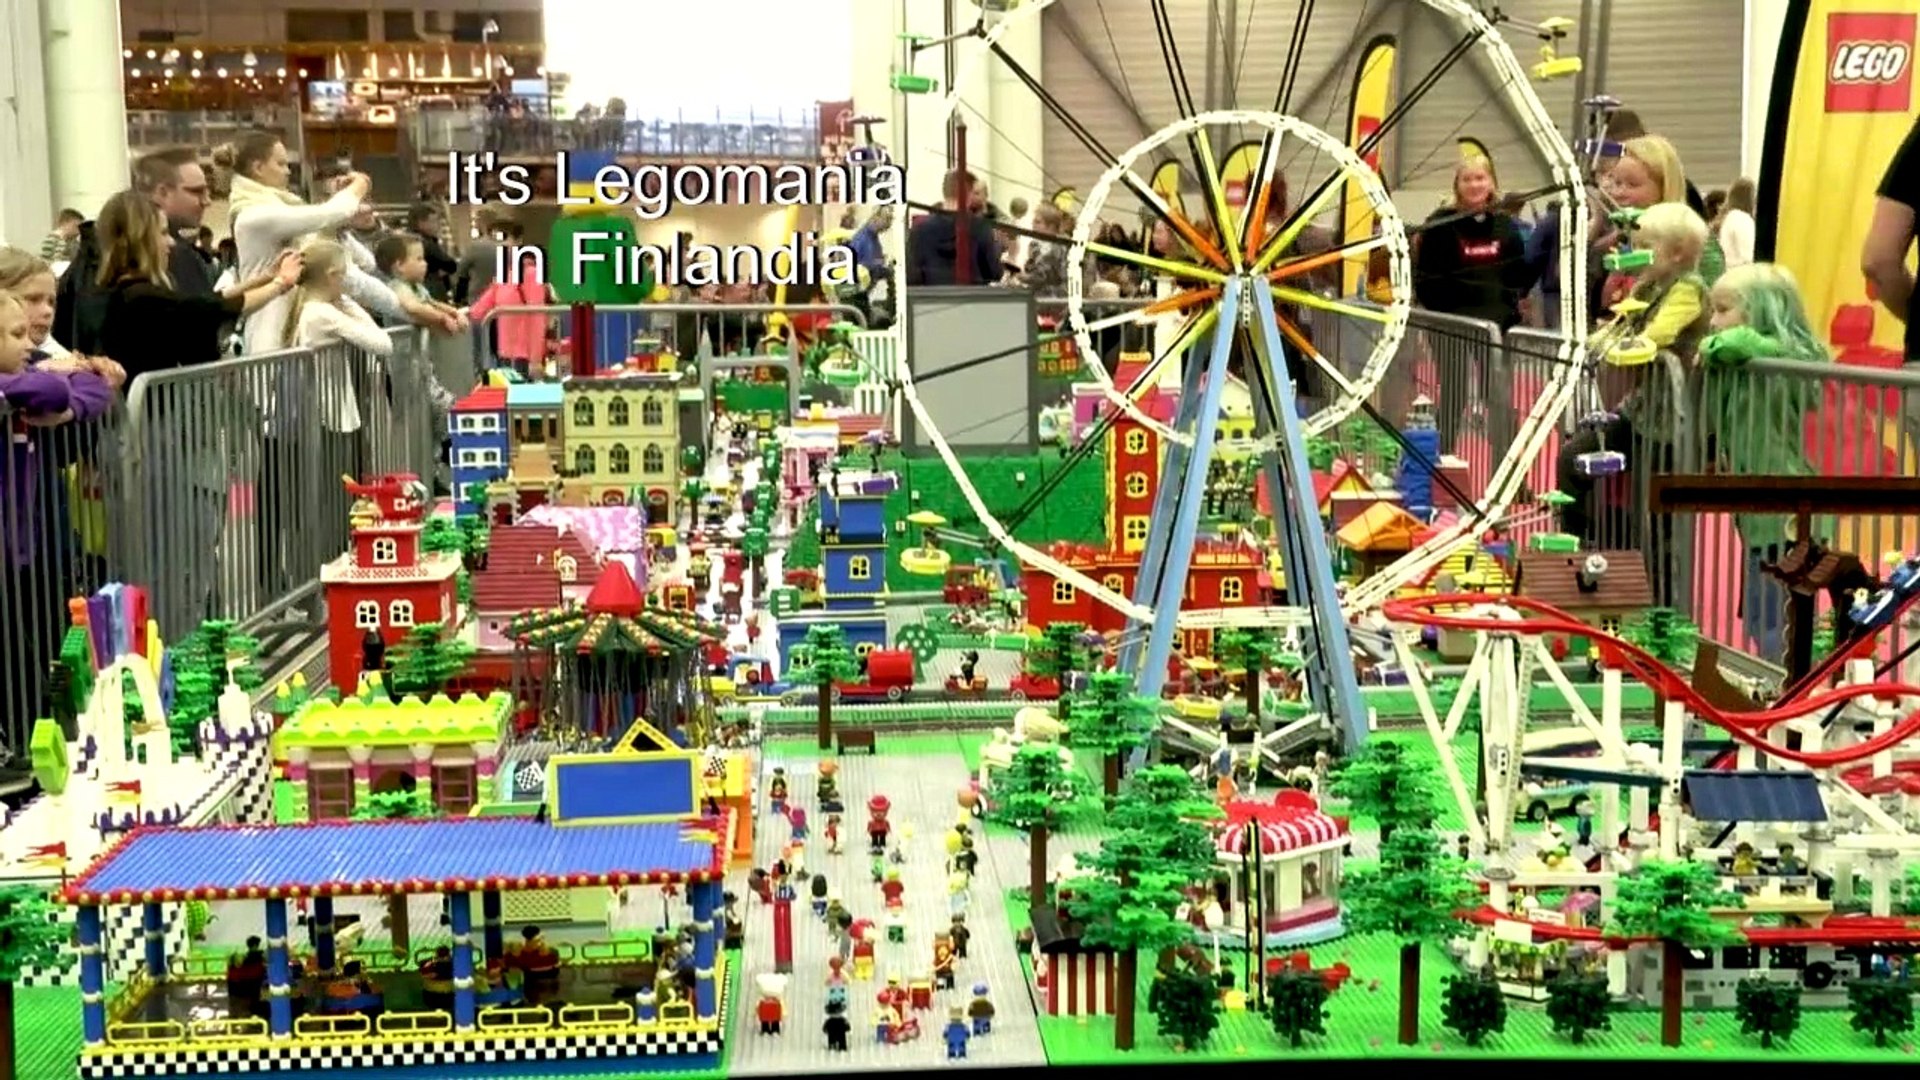 Thousands of Lego fans gather to build megacity in Finland - Vidéo  Dailymotion